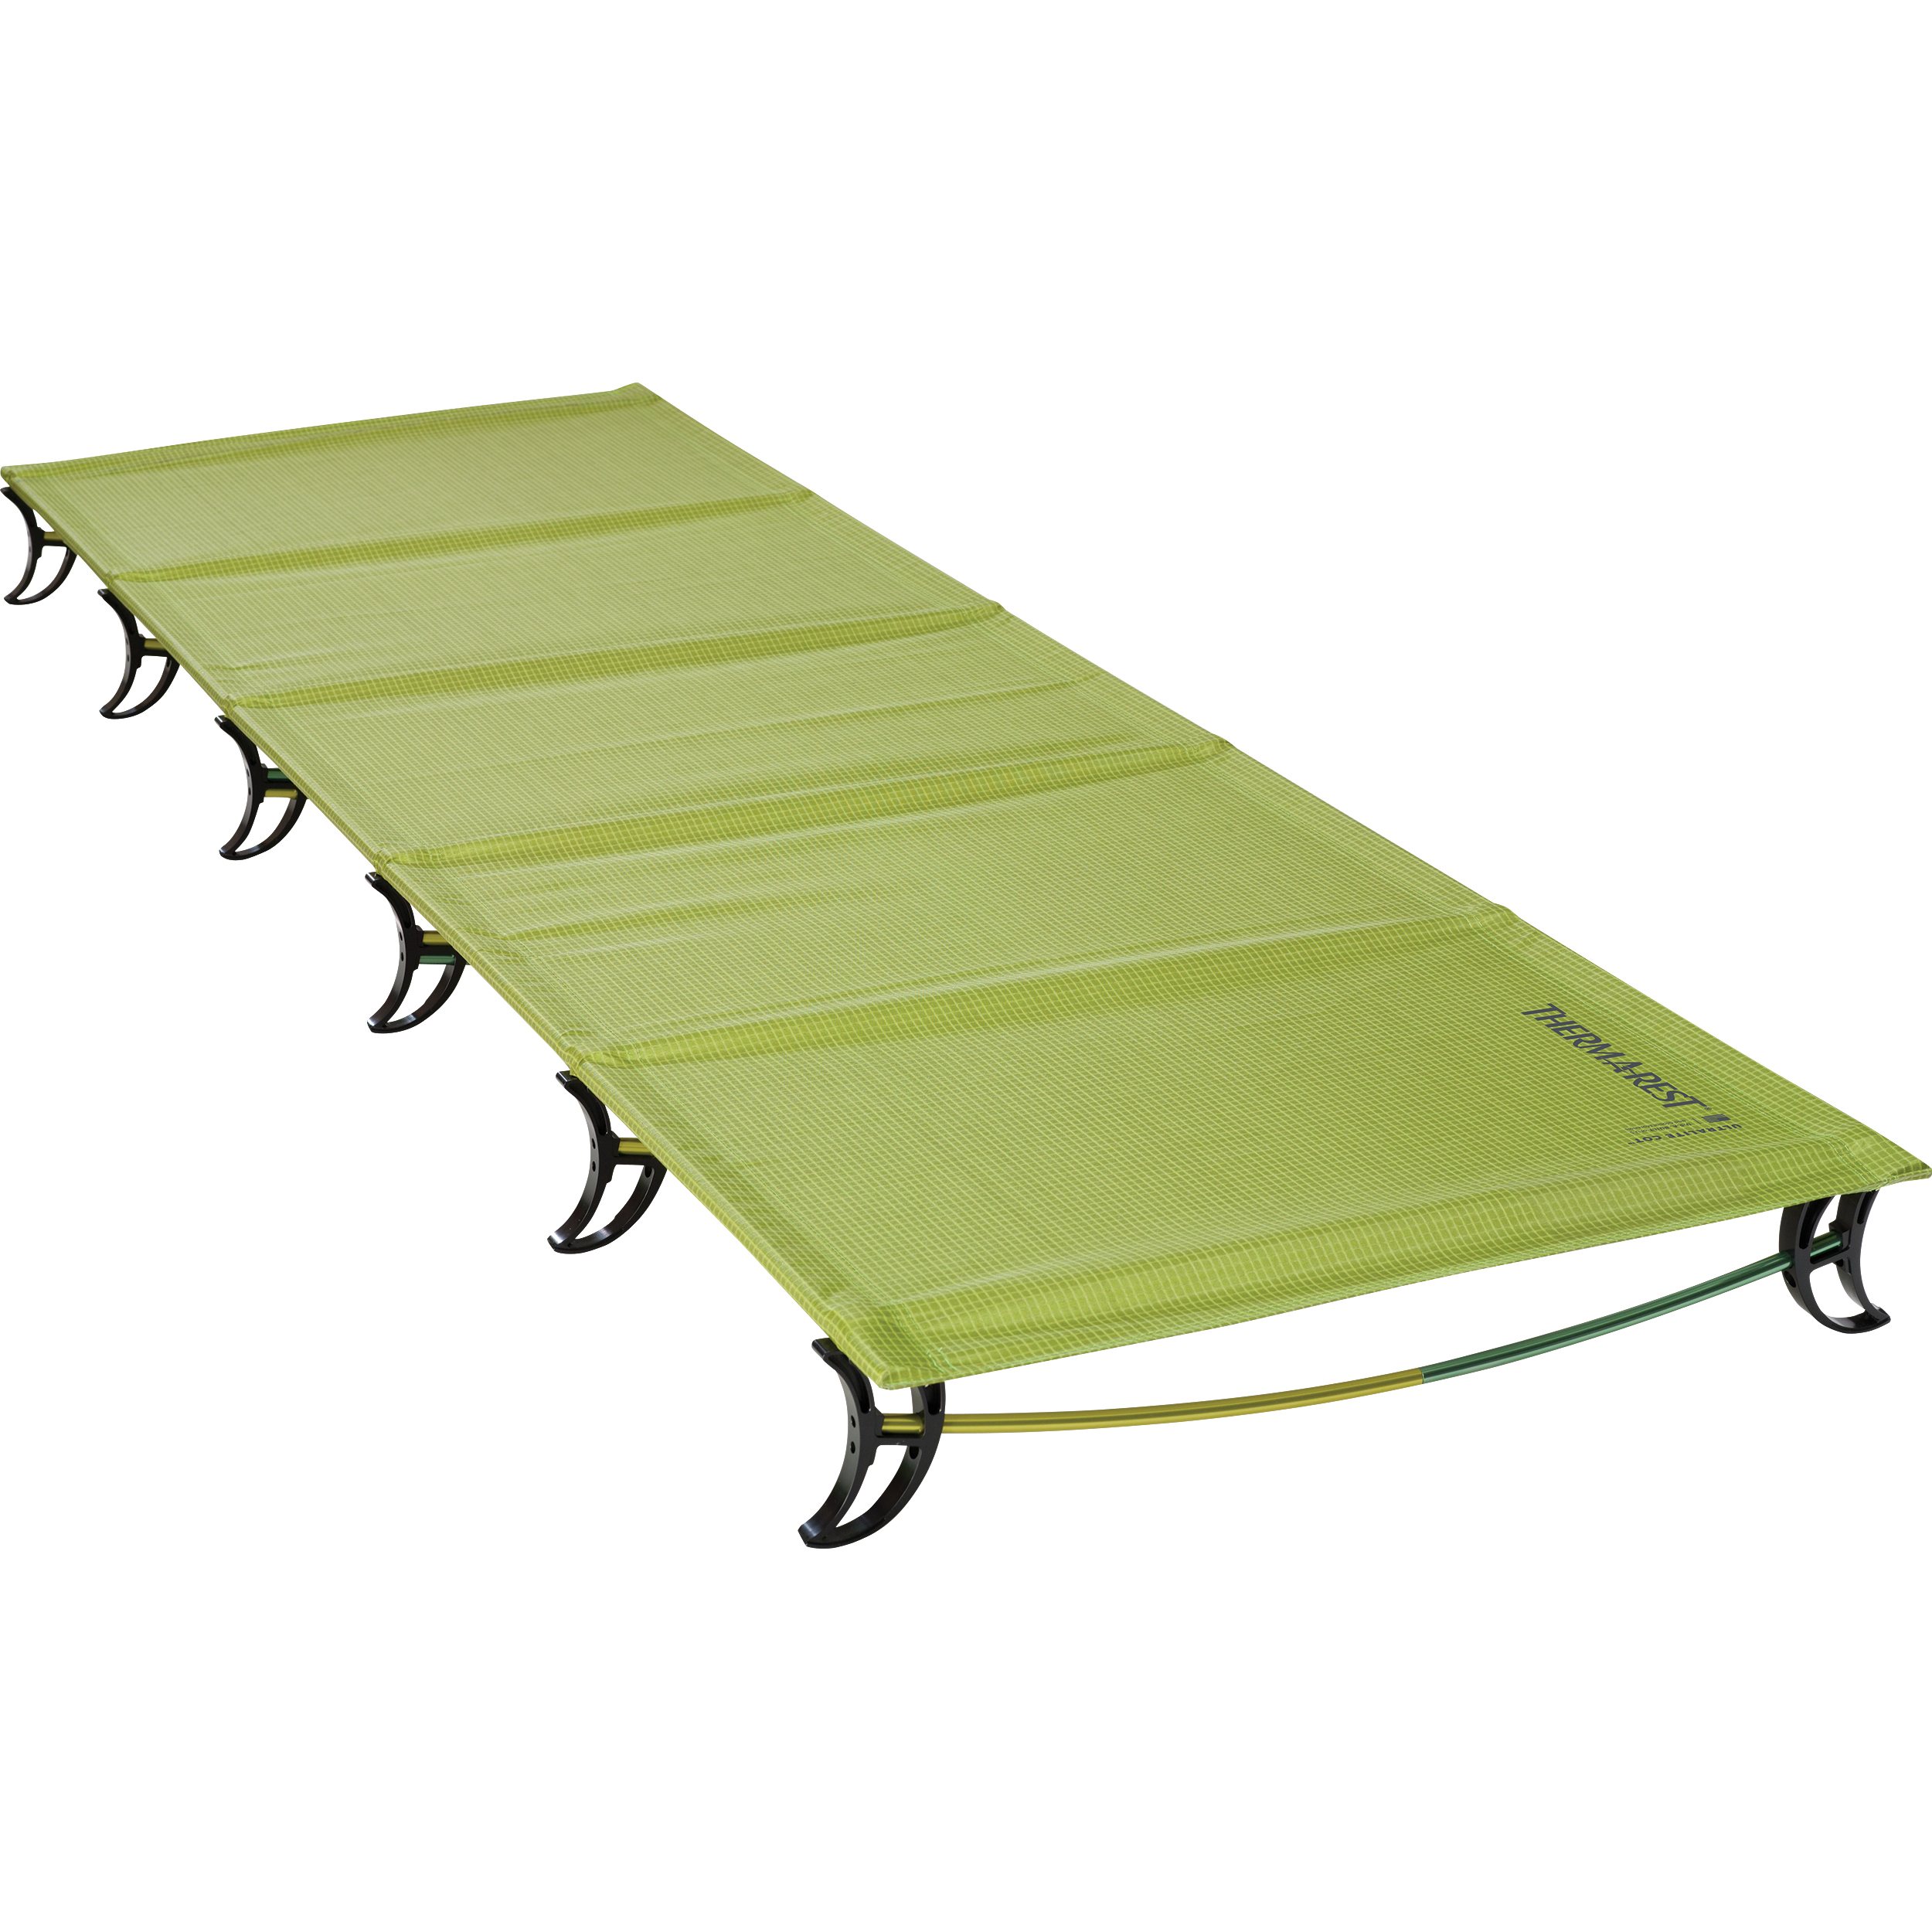 LuxeryLite UltralLght Cot, large